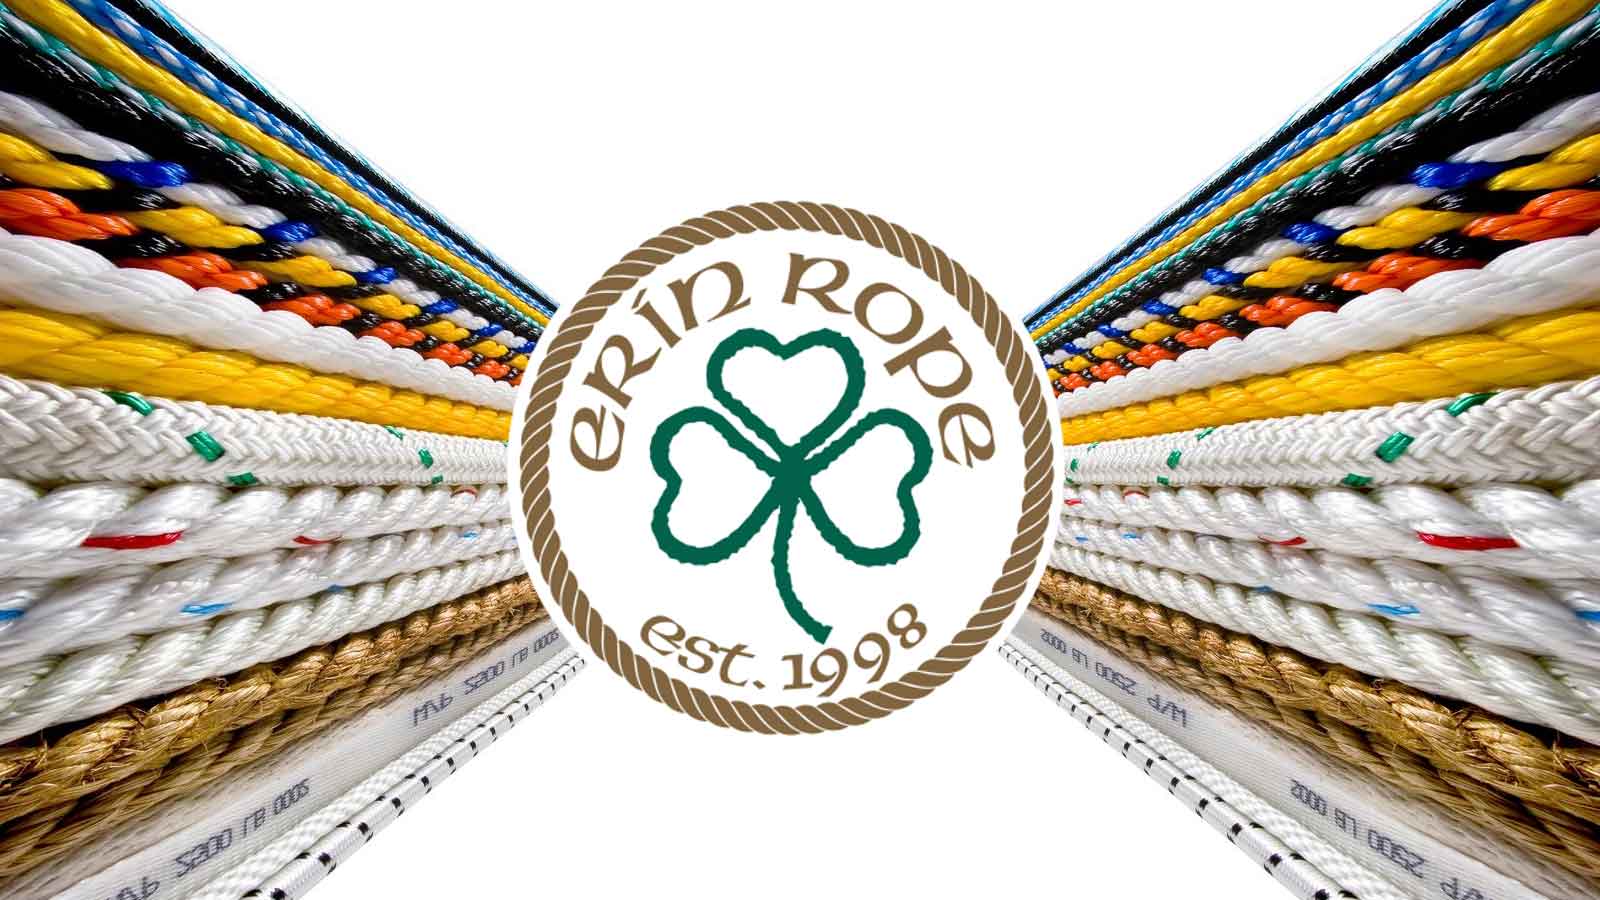 Erin Rope Offerings and logo